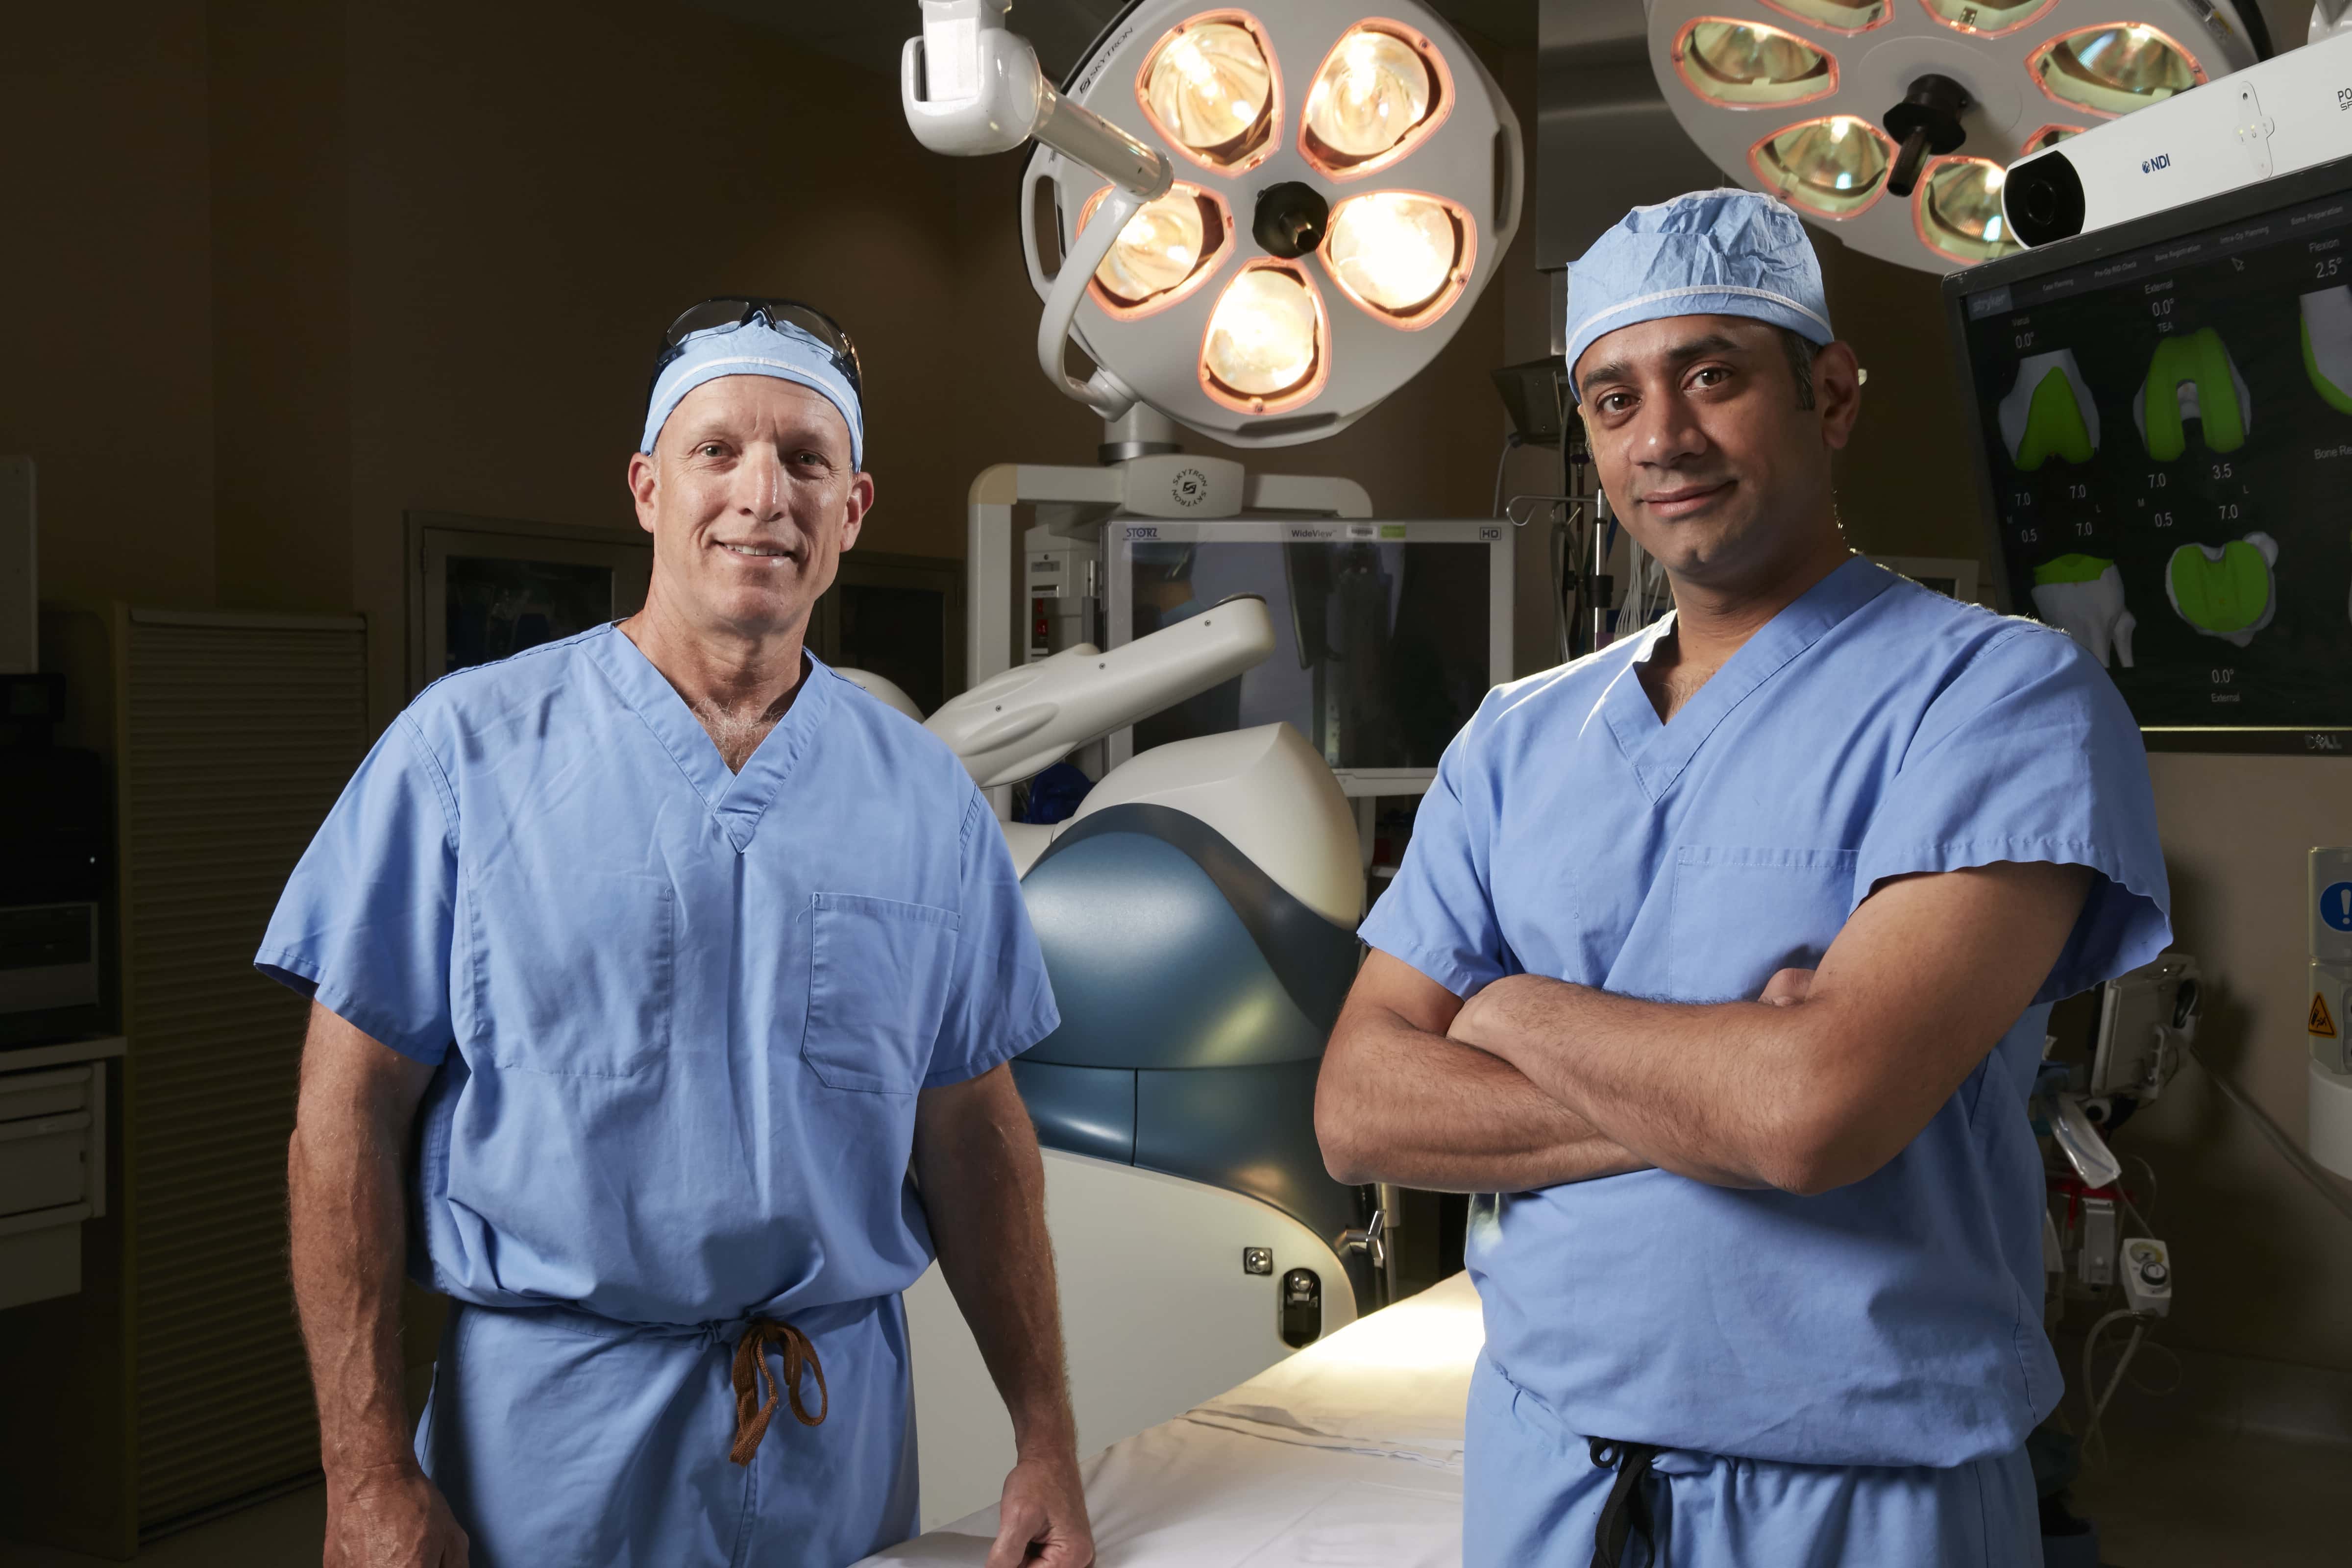 Doctors Mark Peterson, left, and Sridhar Durbhakula, who are responsible for the new robotic knee replacement procedure at Shady Grove Medical Center. [Photo: Adventist HealthCare]